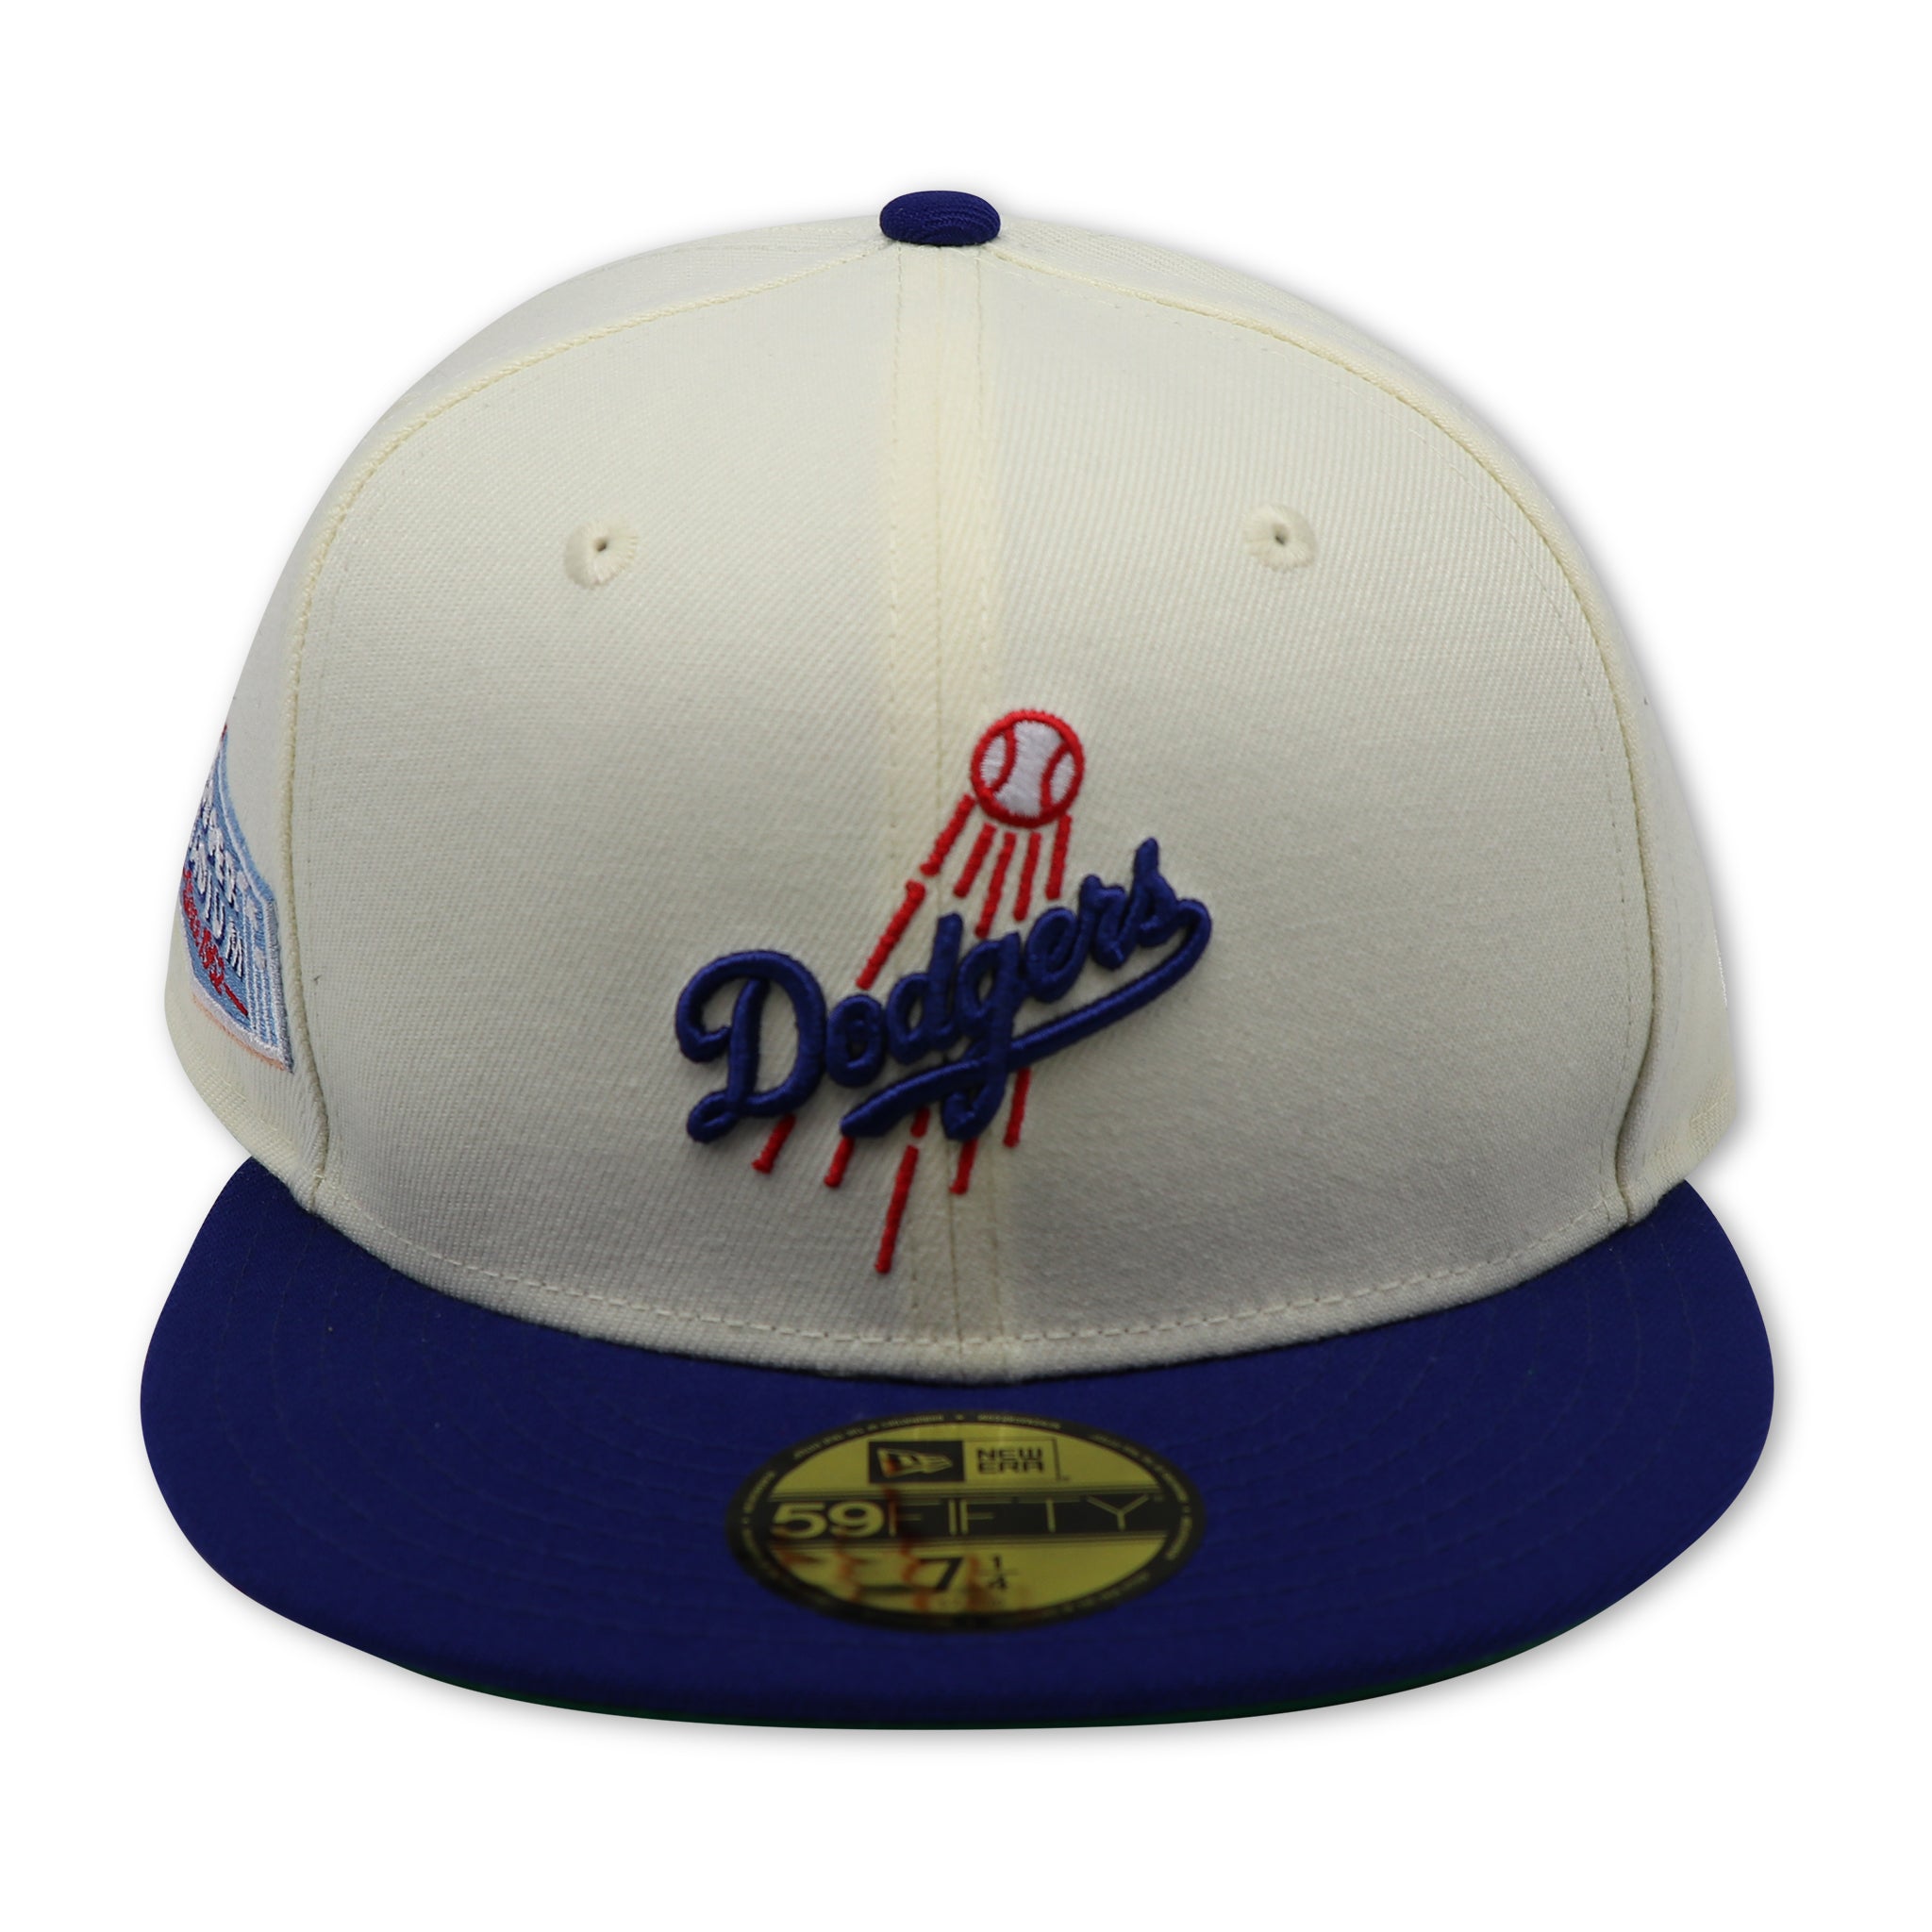 LOS ANGELES DODGERS (OFF-WHITE) (DODGER STADIUM) NEW ERA 59FIFTY FITTED (GREEN UNDER VISOR)